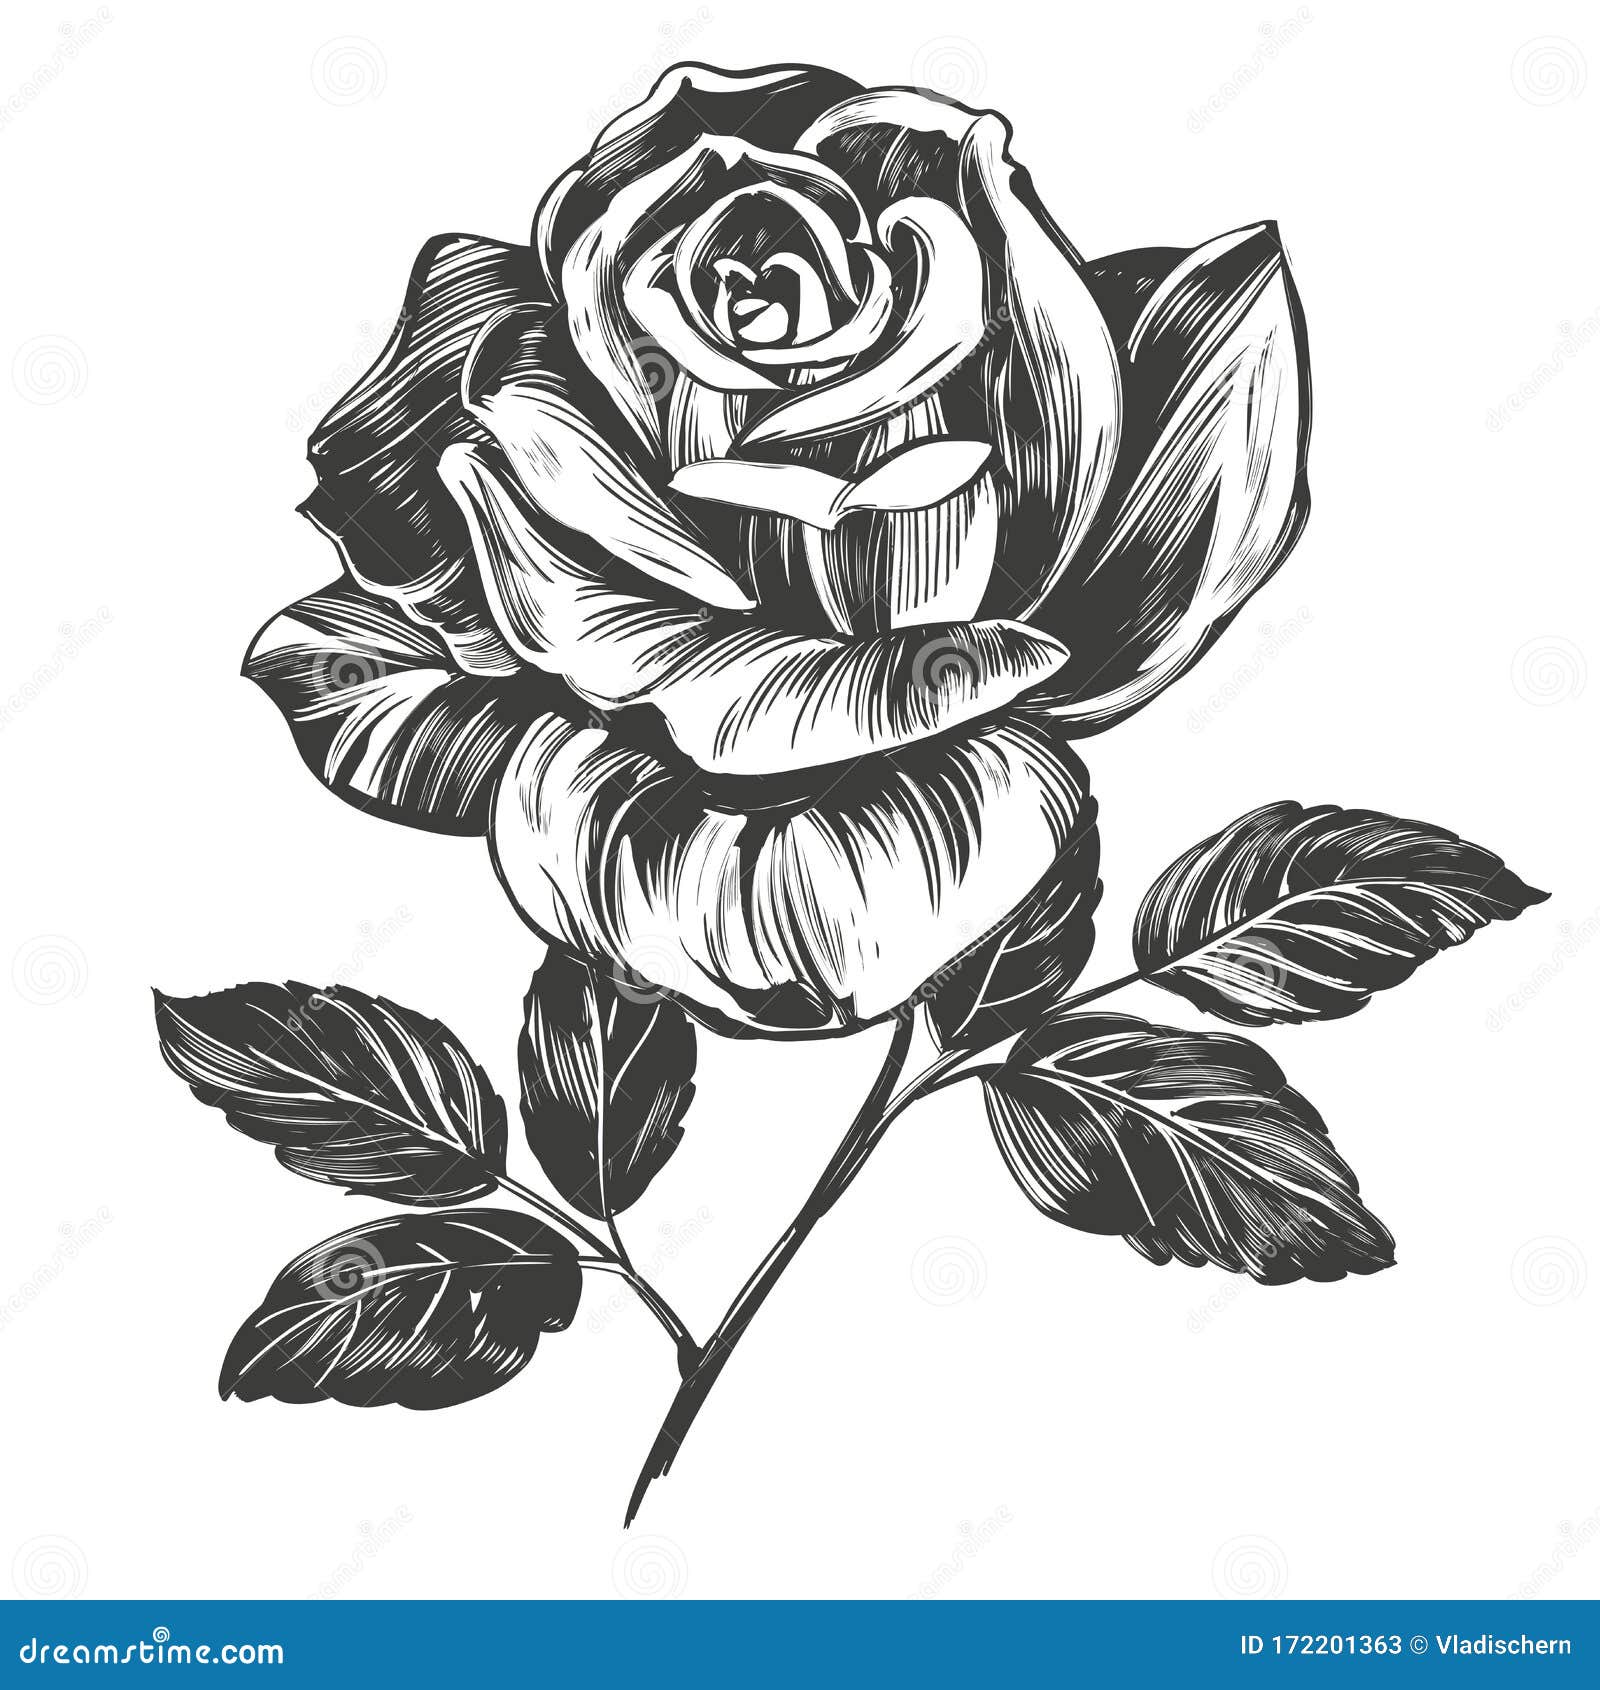 How to draw realistic rose flowerstep by step rose pencil drawing  YouTube